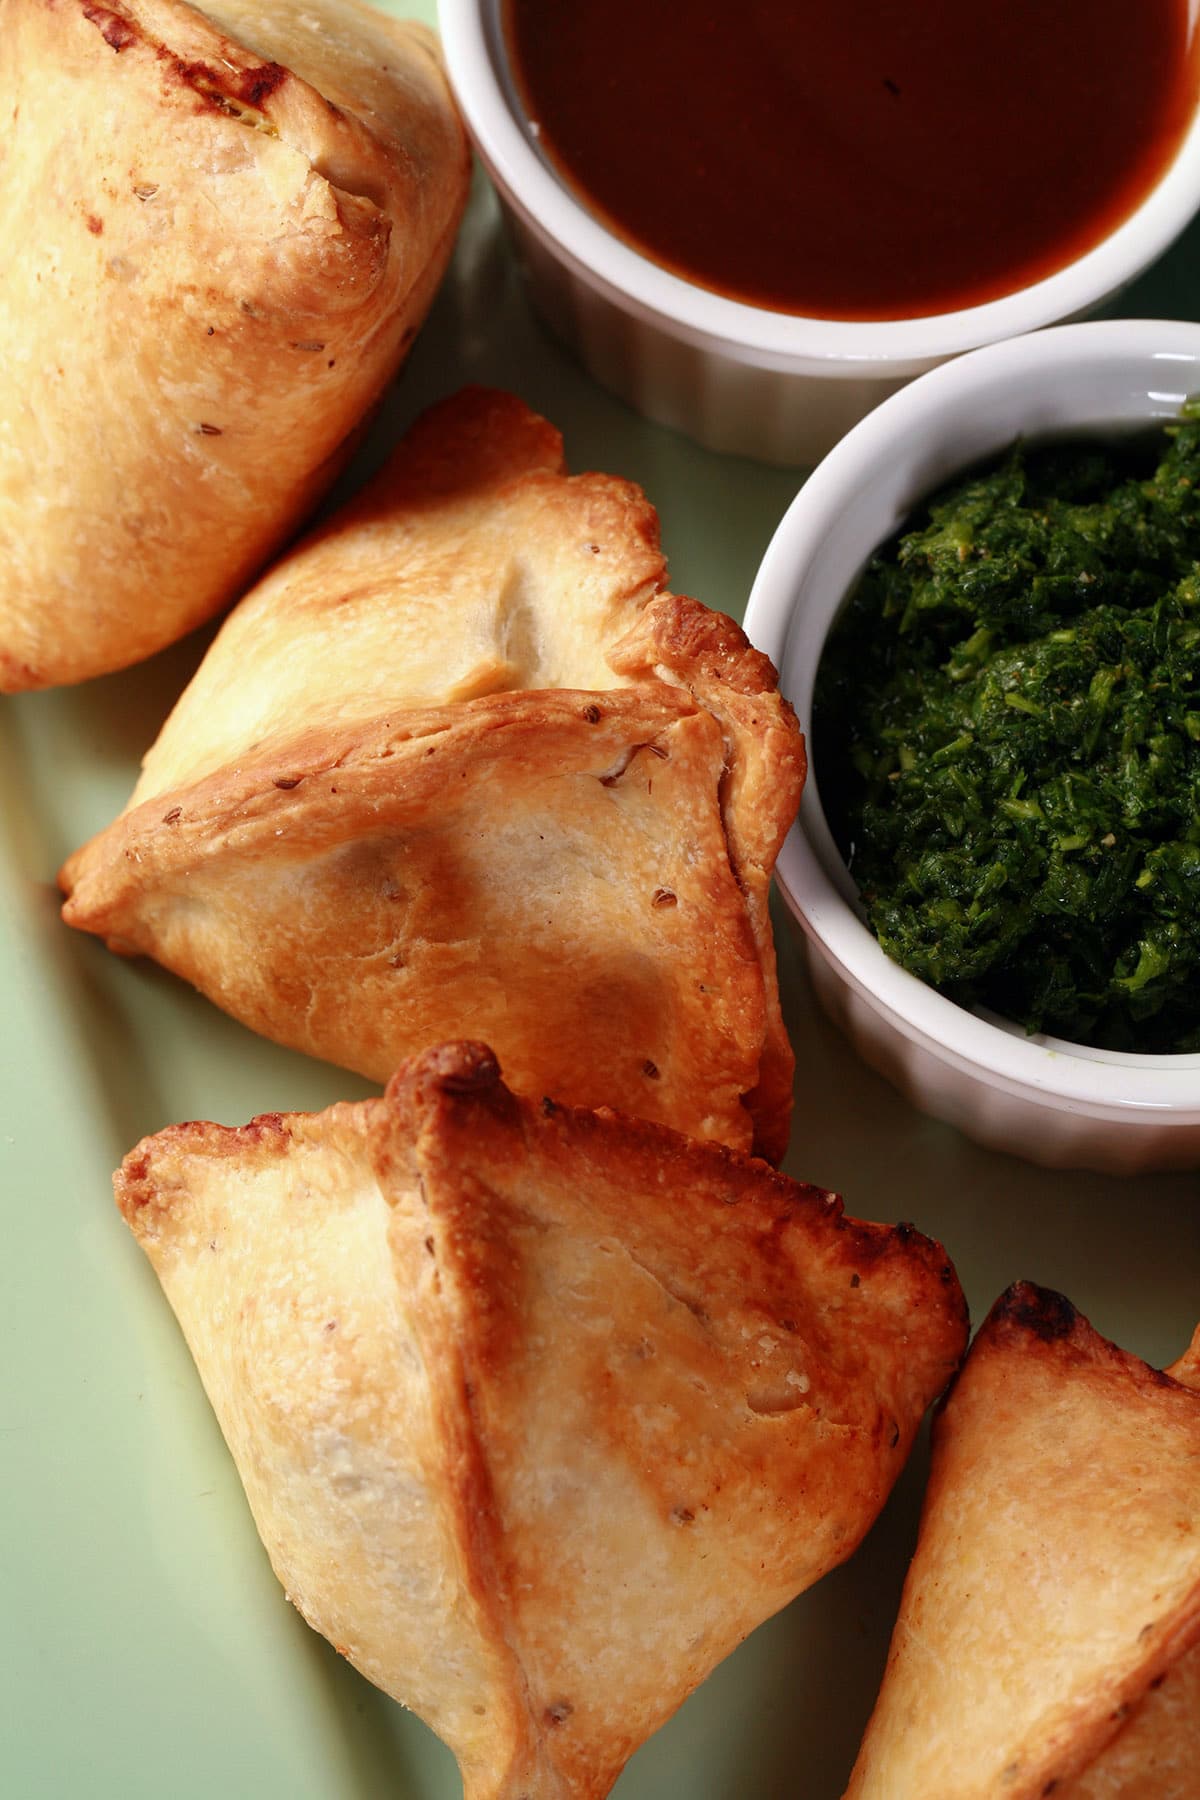 A plate of air fried samosas, with bowls of tamarind and mint chutneys beside them.